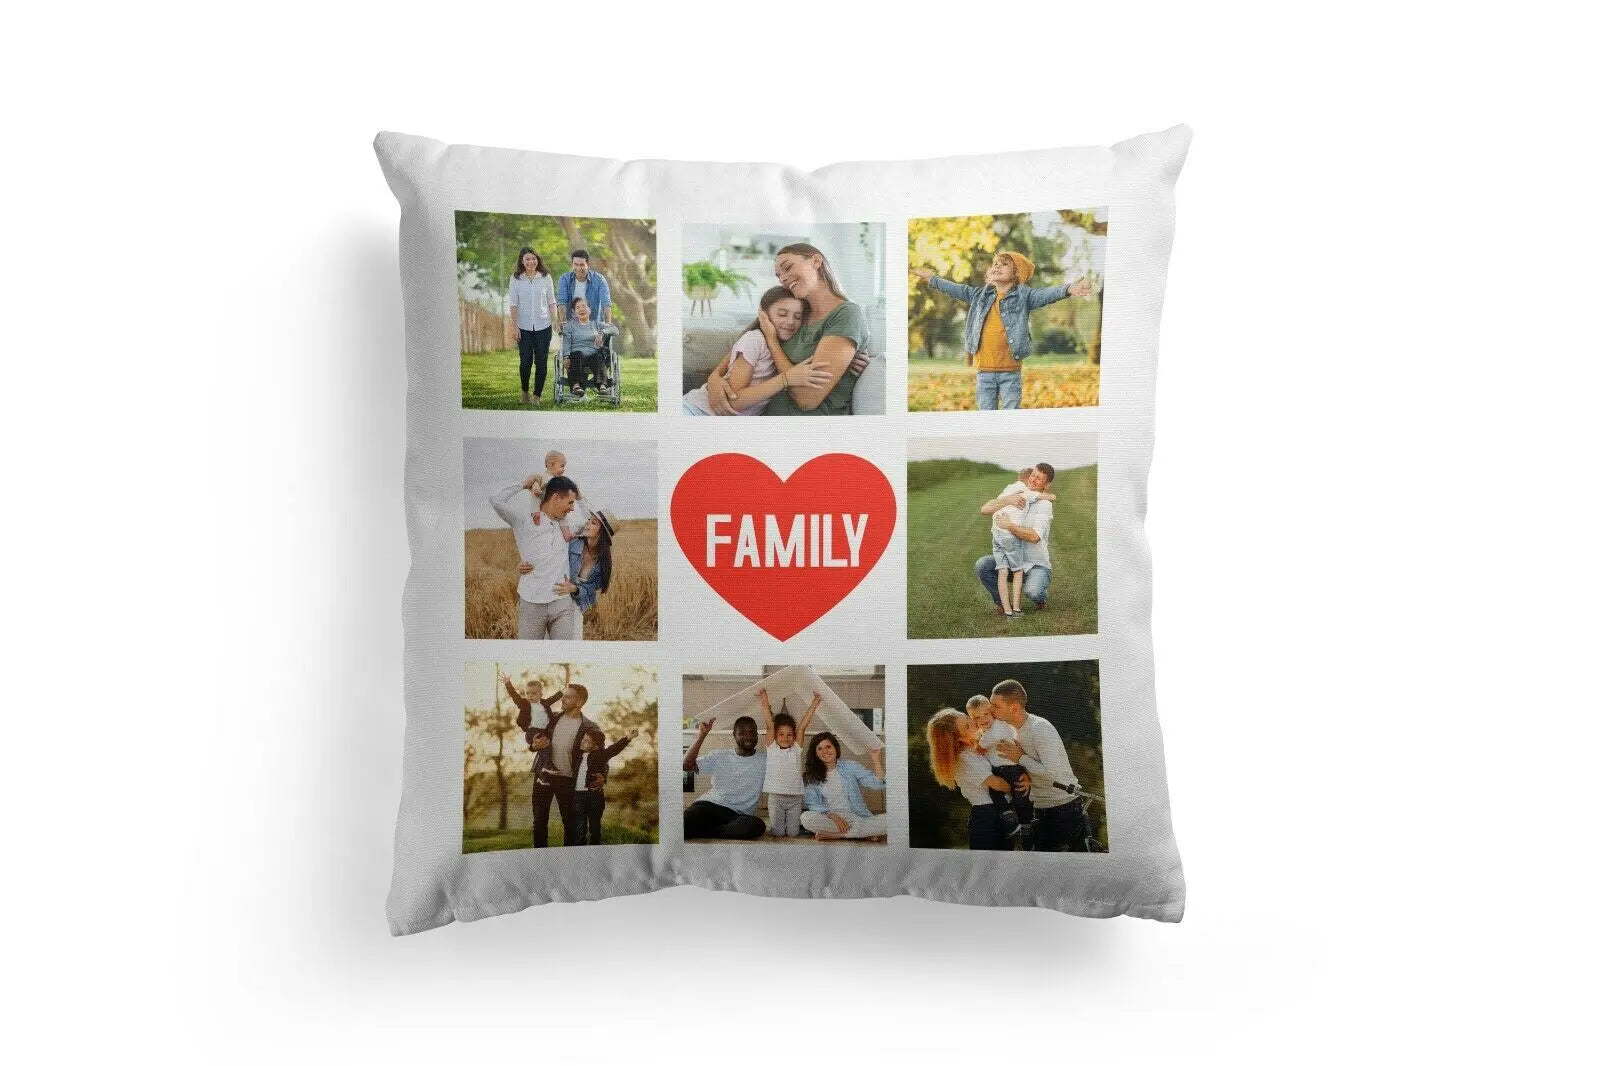 Personalised Cushion 8 Image Perfect Gift Décor  - Family - CushionPop